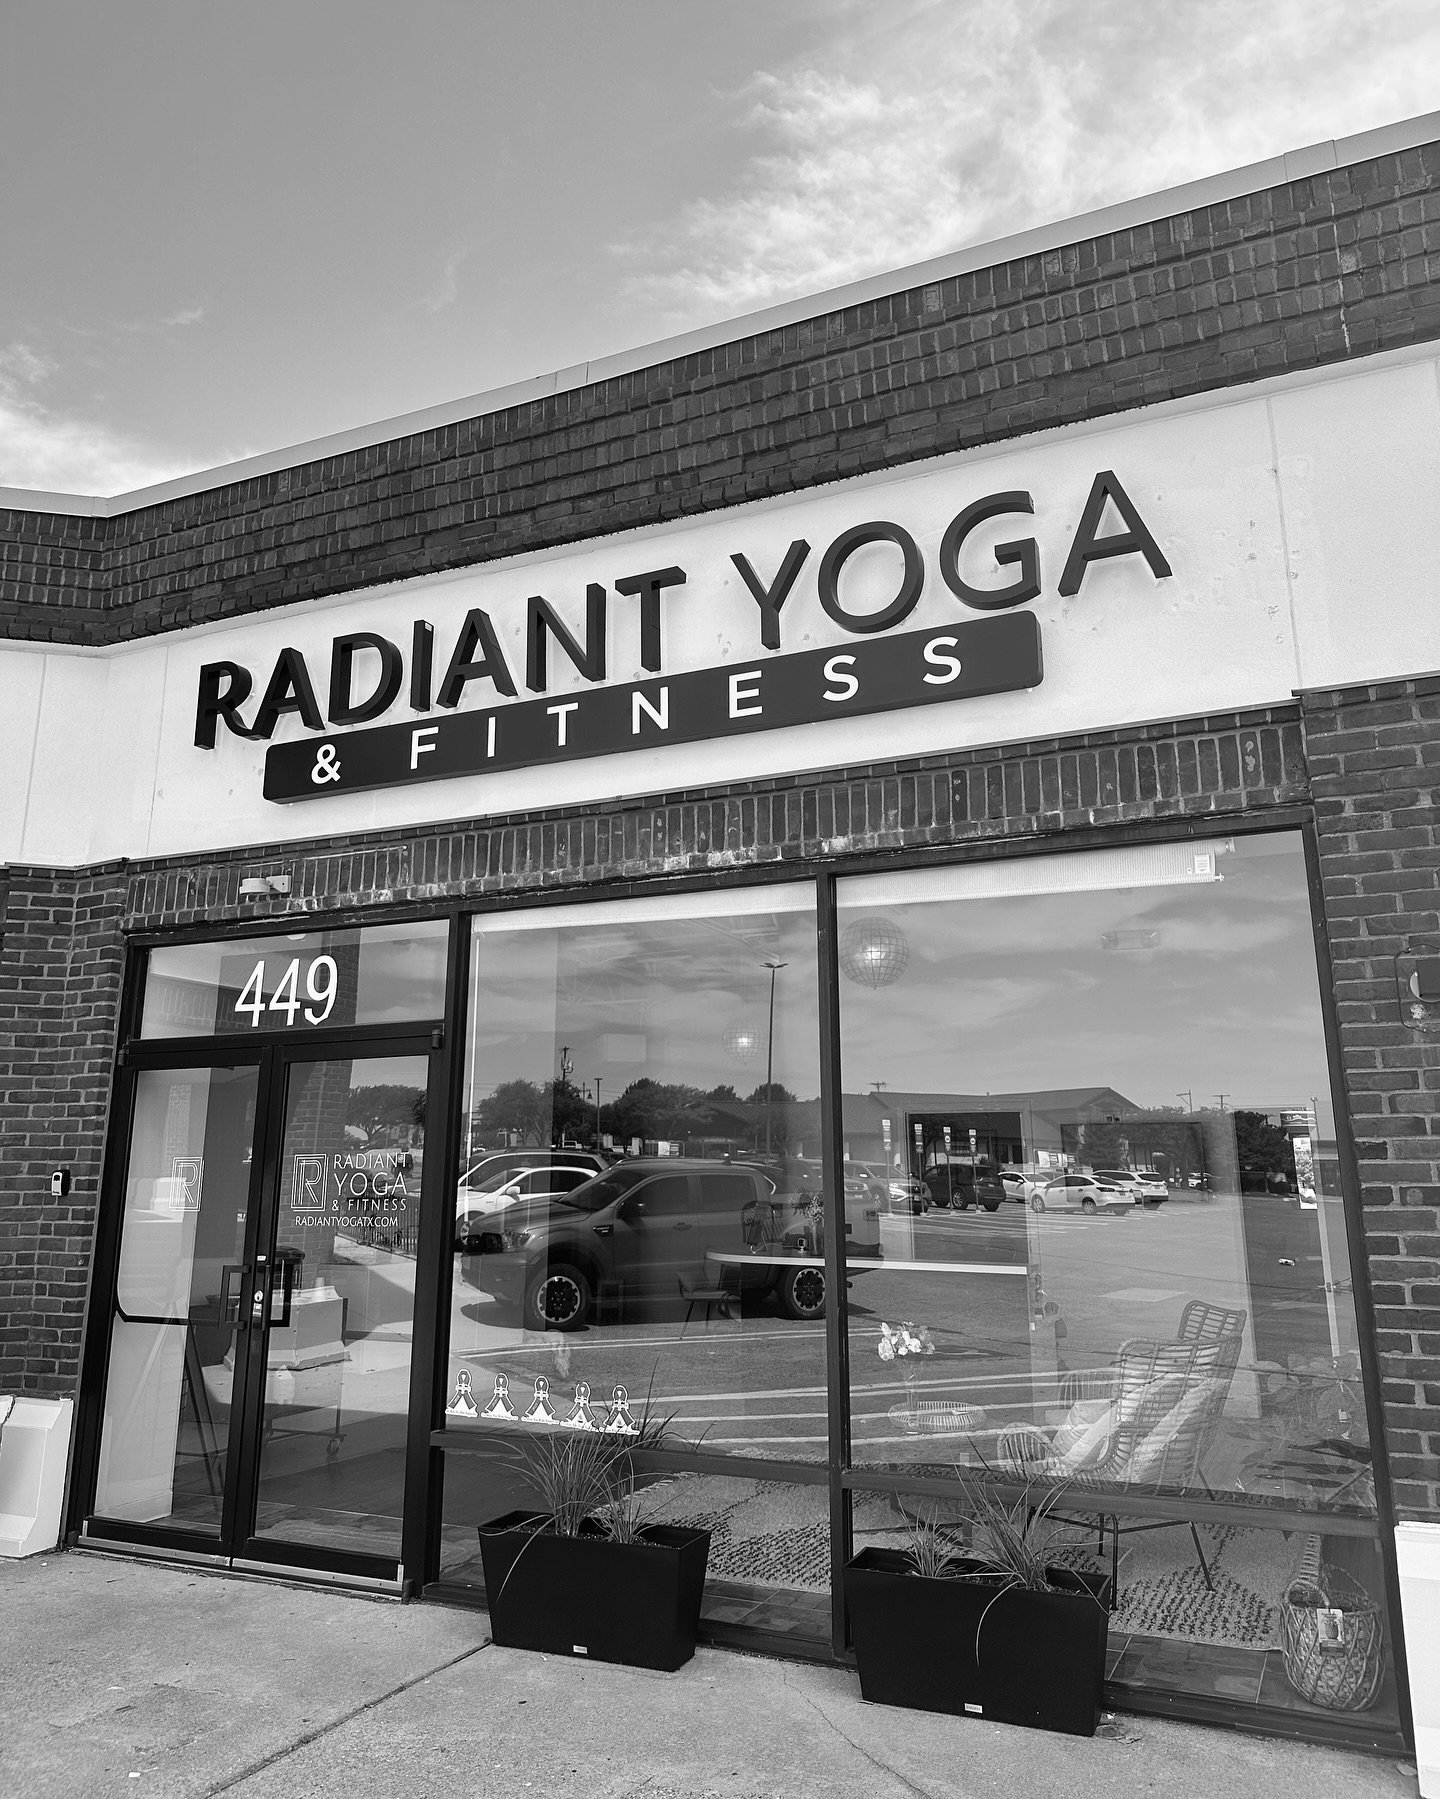 Are you looking for a new YOGA &amp; Fitness Studio? We are here! Check us out online or in person and experience all the Good Vibes!! Radiantyogatx.com

#yoga #hotyoga #vinyasa #soundbath #meditation #pilates #hiit #restorativeyoga